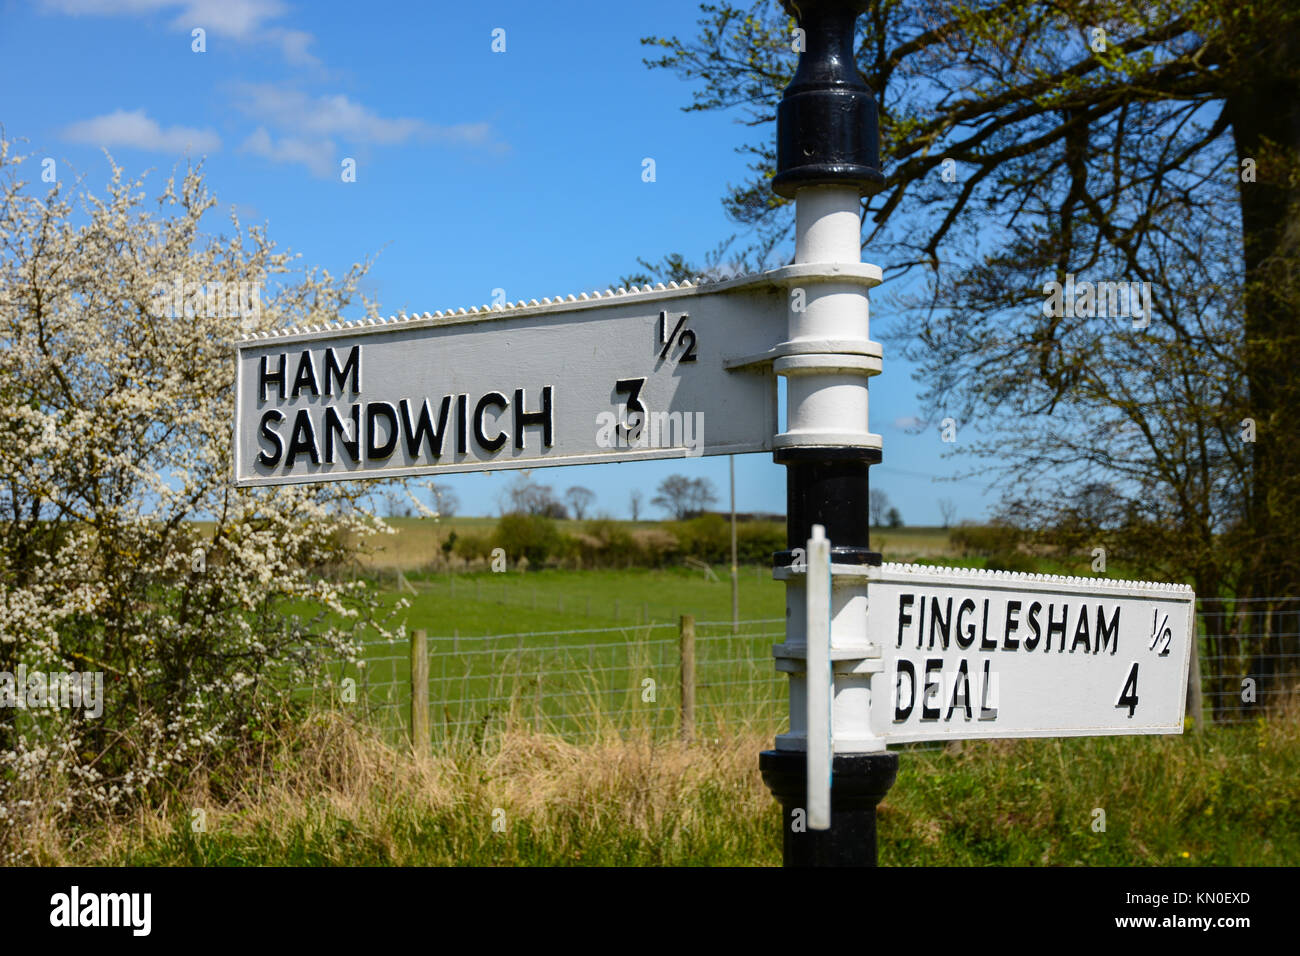 Amusing funny old fashioned signpost for Ham Sandwich, Finglesham and Deal in Kent, England with blue sky, sunshine and green field behind Stock Photo